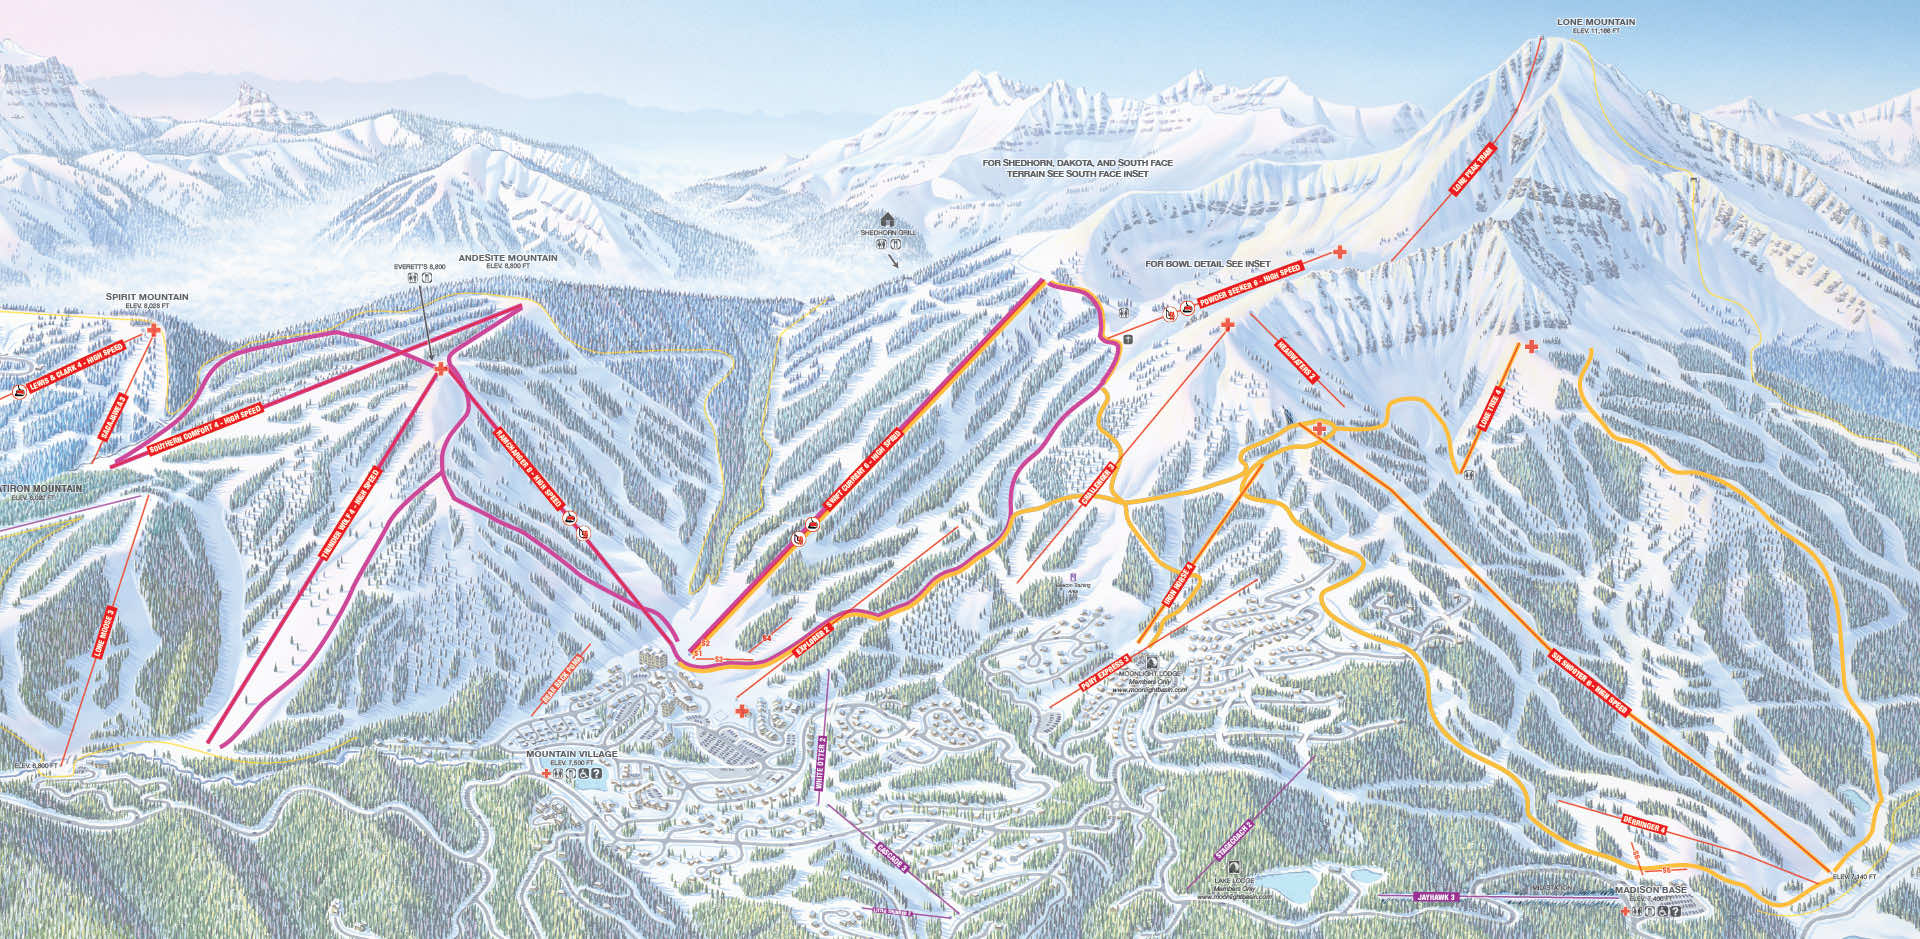 Big Sky trail map showing Mountain Host tour routes